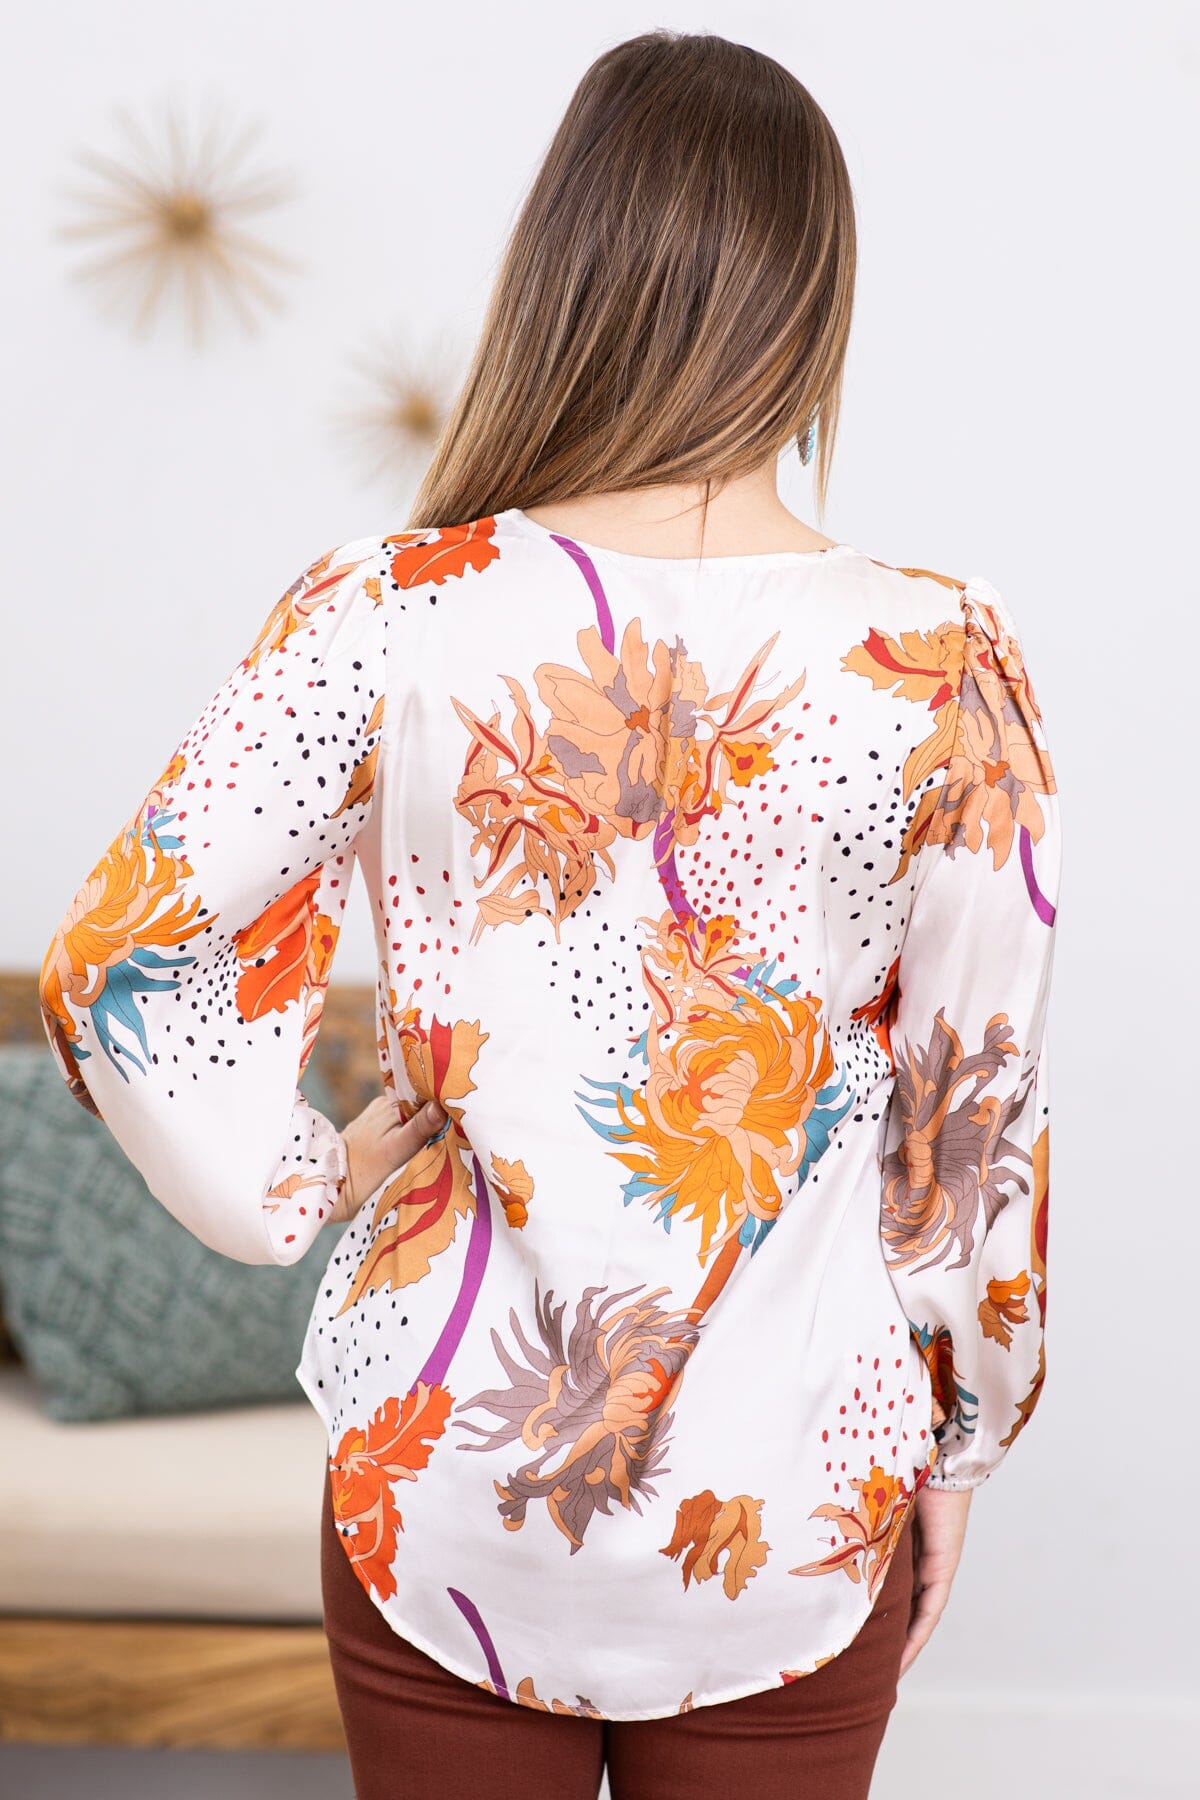 Off White and Copper Floral Print Top - Filly Flair